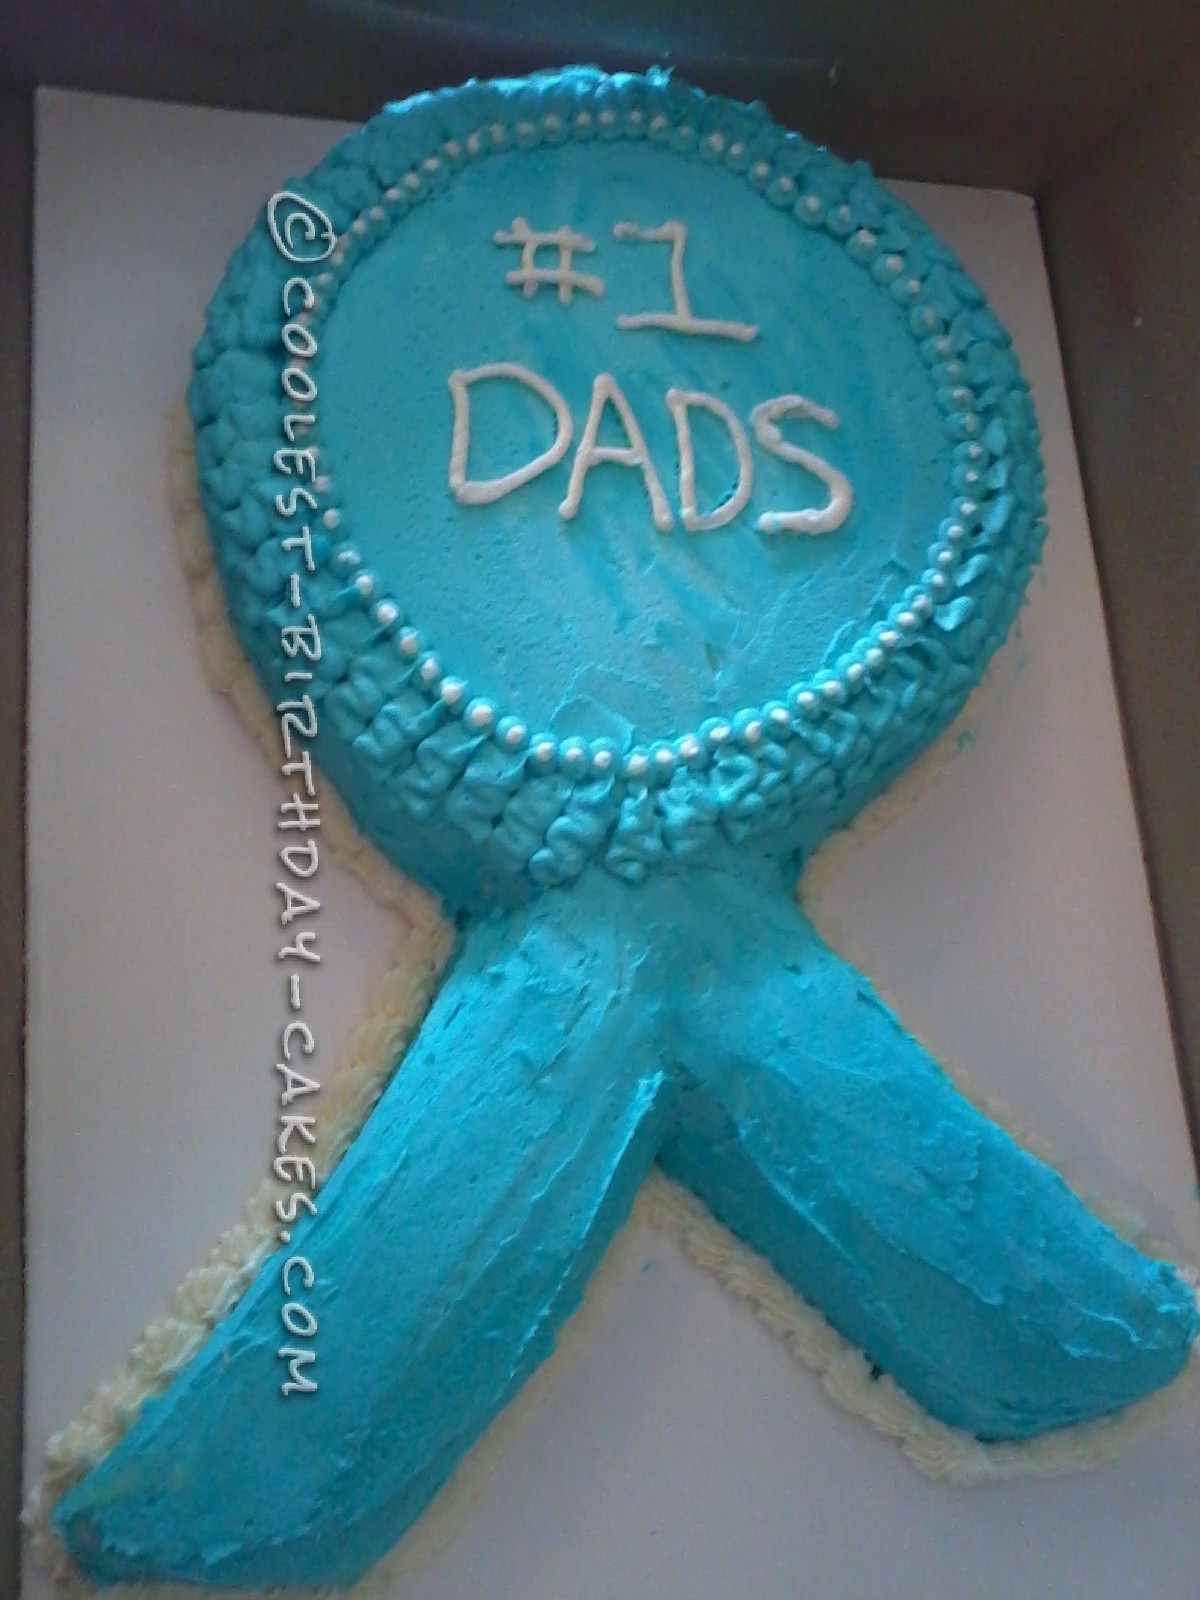 Make Dad a Special Father's Day DIY Cake